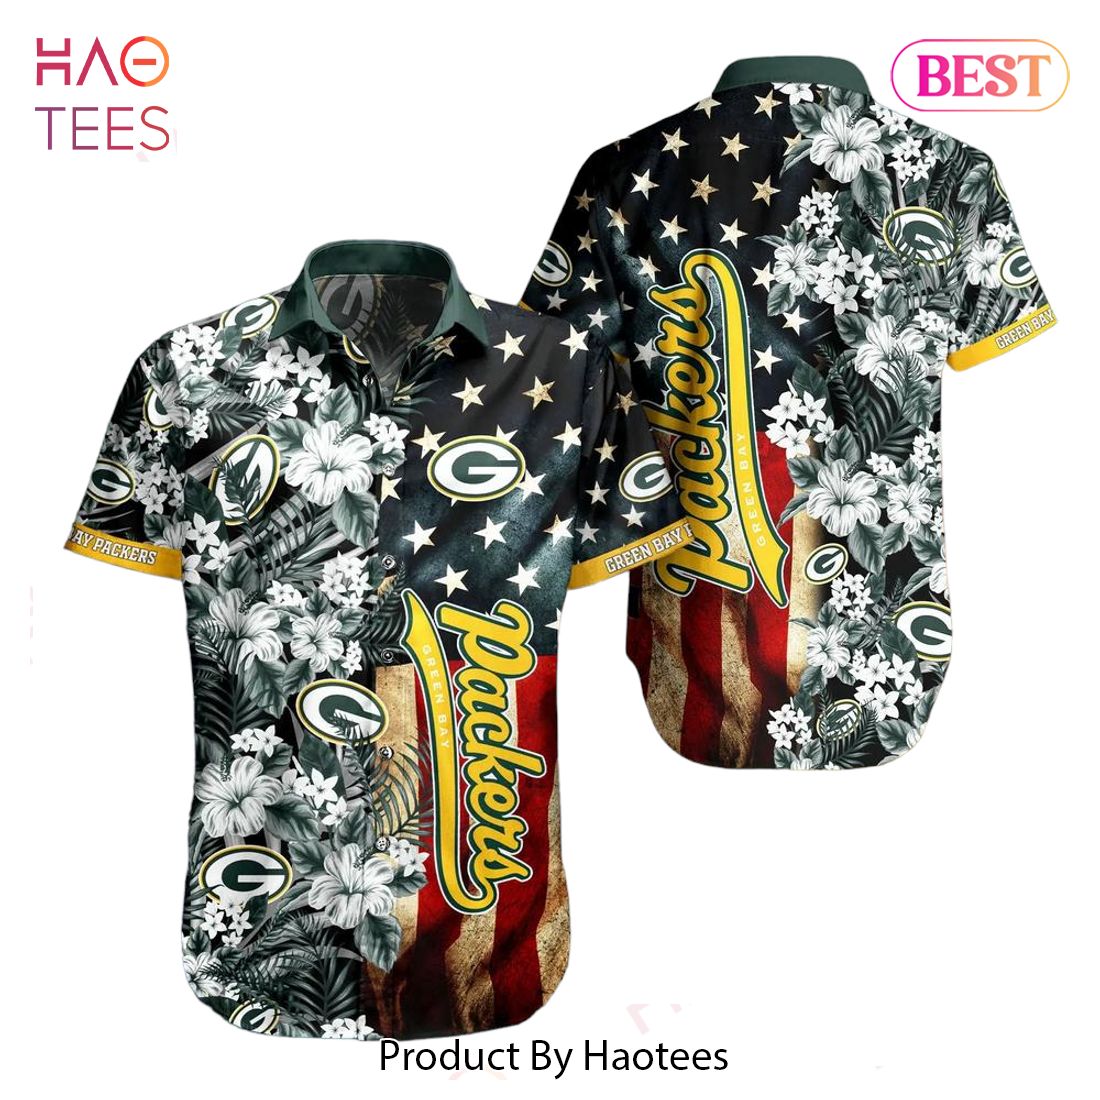 HOT TREND Green Bay Packers Nfl Graphic Us Flag Flower Hawaiian Shirt New Trends Summer Gift Ever Fans